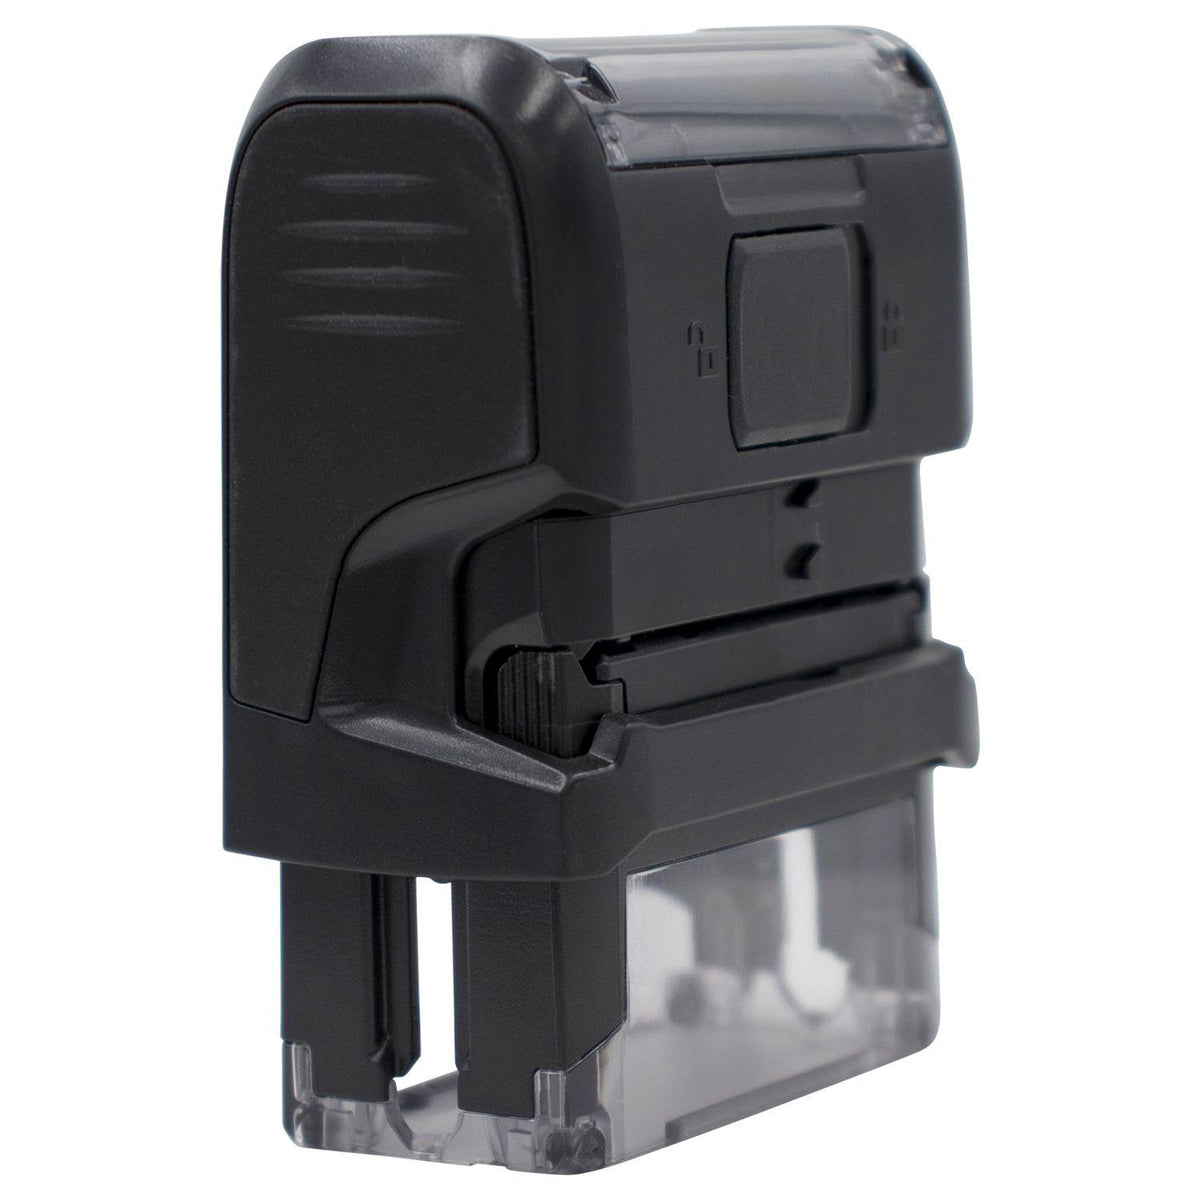 Self Inking Vehicle Loans Stamp - Engineer Seal Stamps - Brand_Trodat, Impression Size_Small, Stamp Type_Self-Inking Stamp, Type of Use_Finance